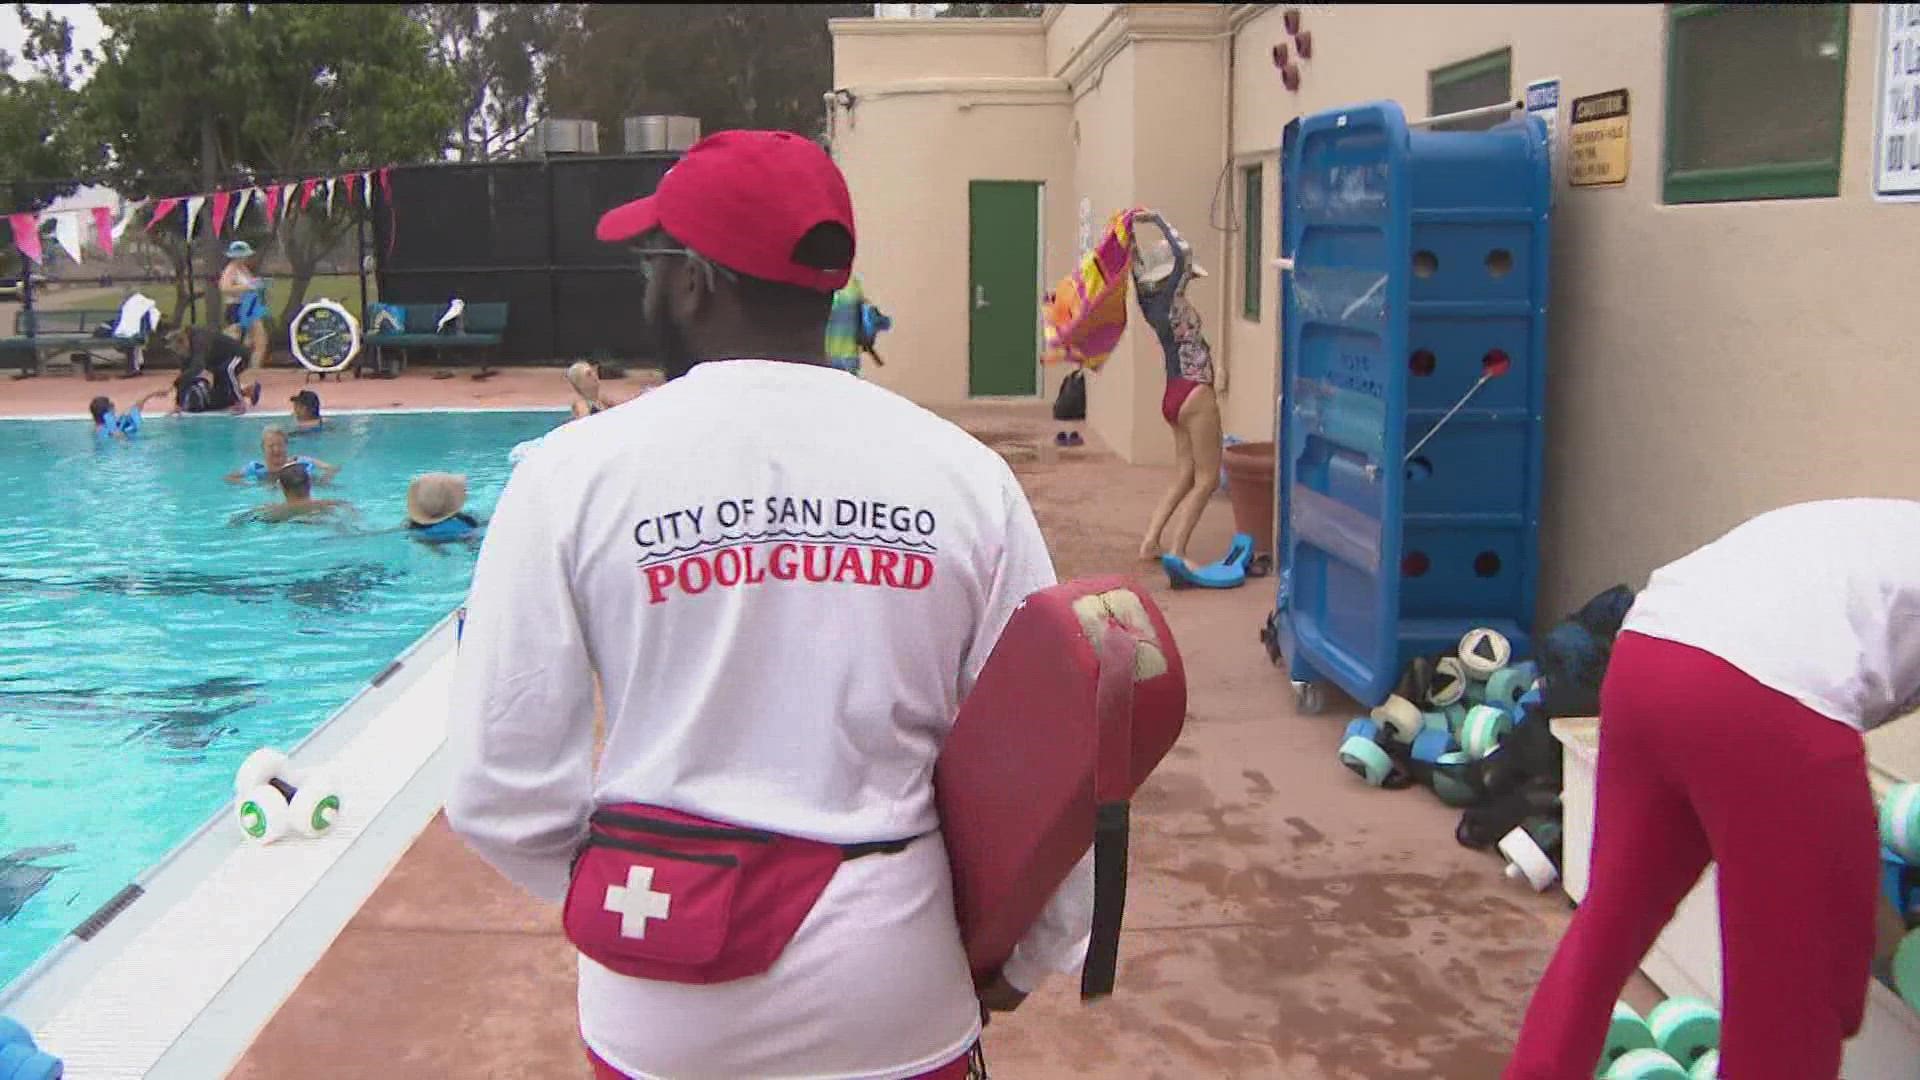 The City of San Diego says it will have to cut back more hours and classes at its 14 pools if they do not hire more lifeguards soon. One YMCA pool needs 20 guards.